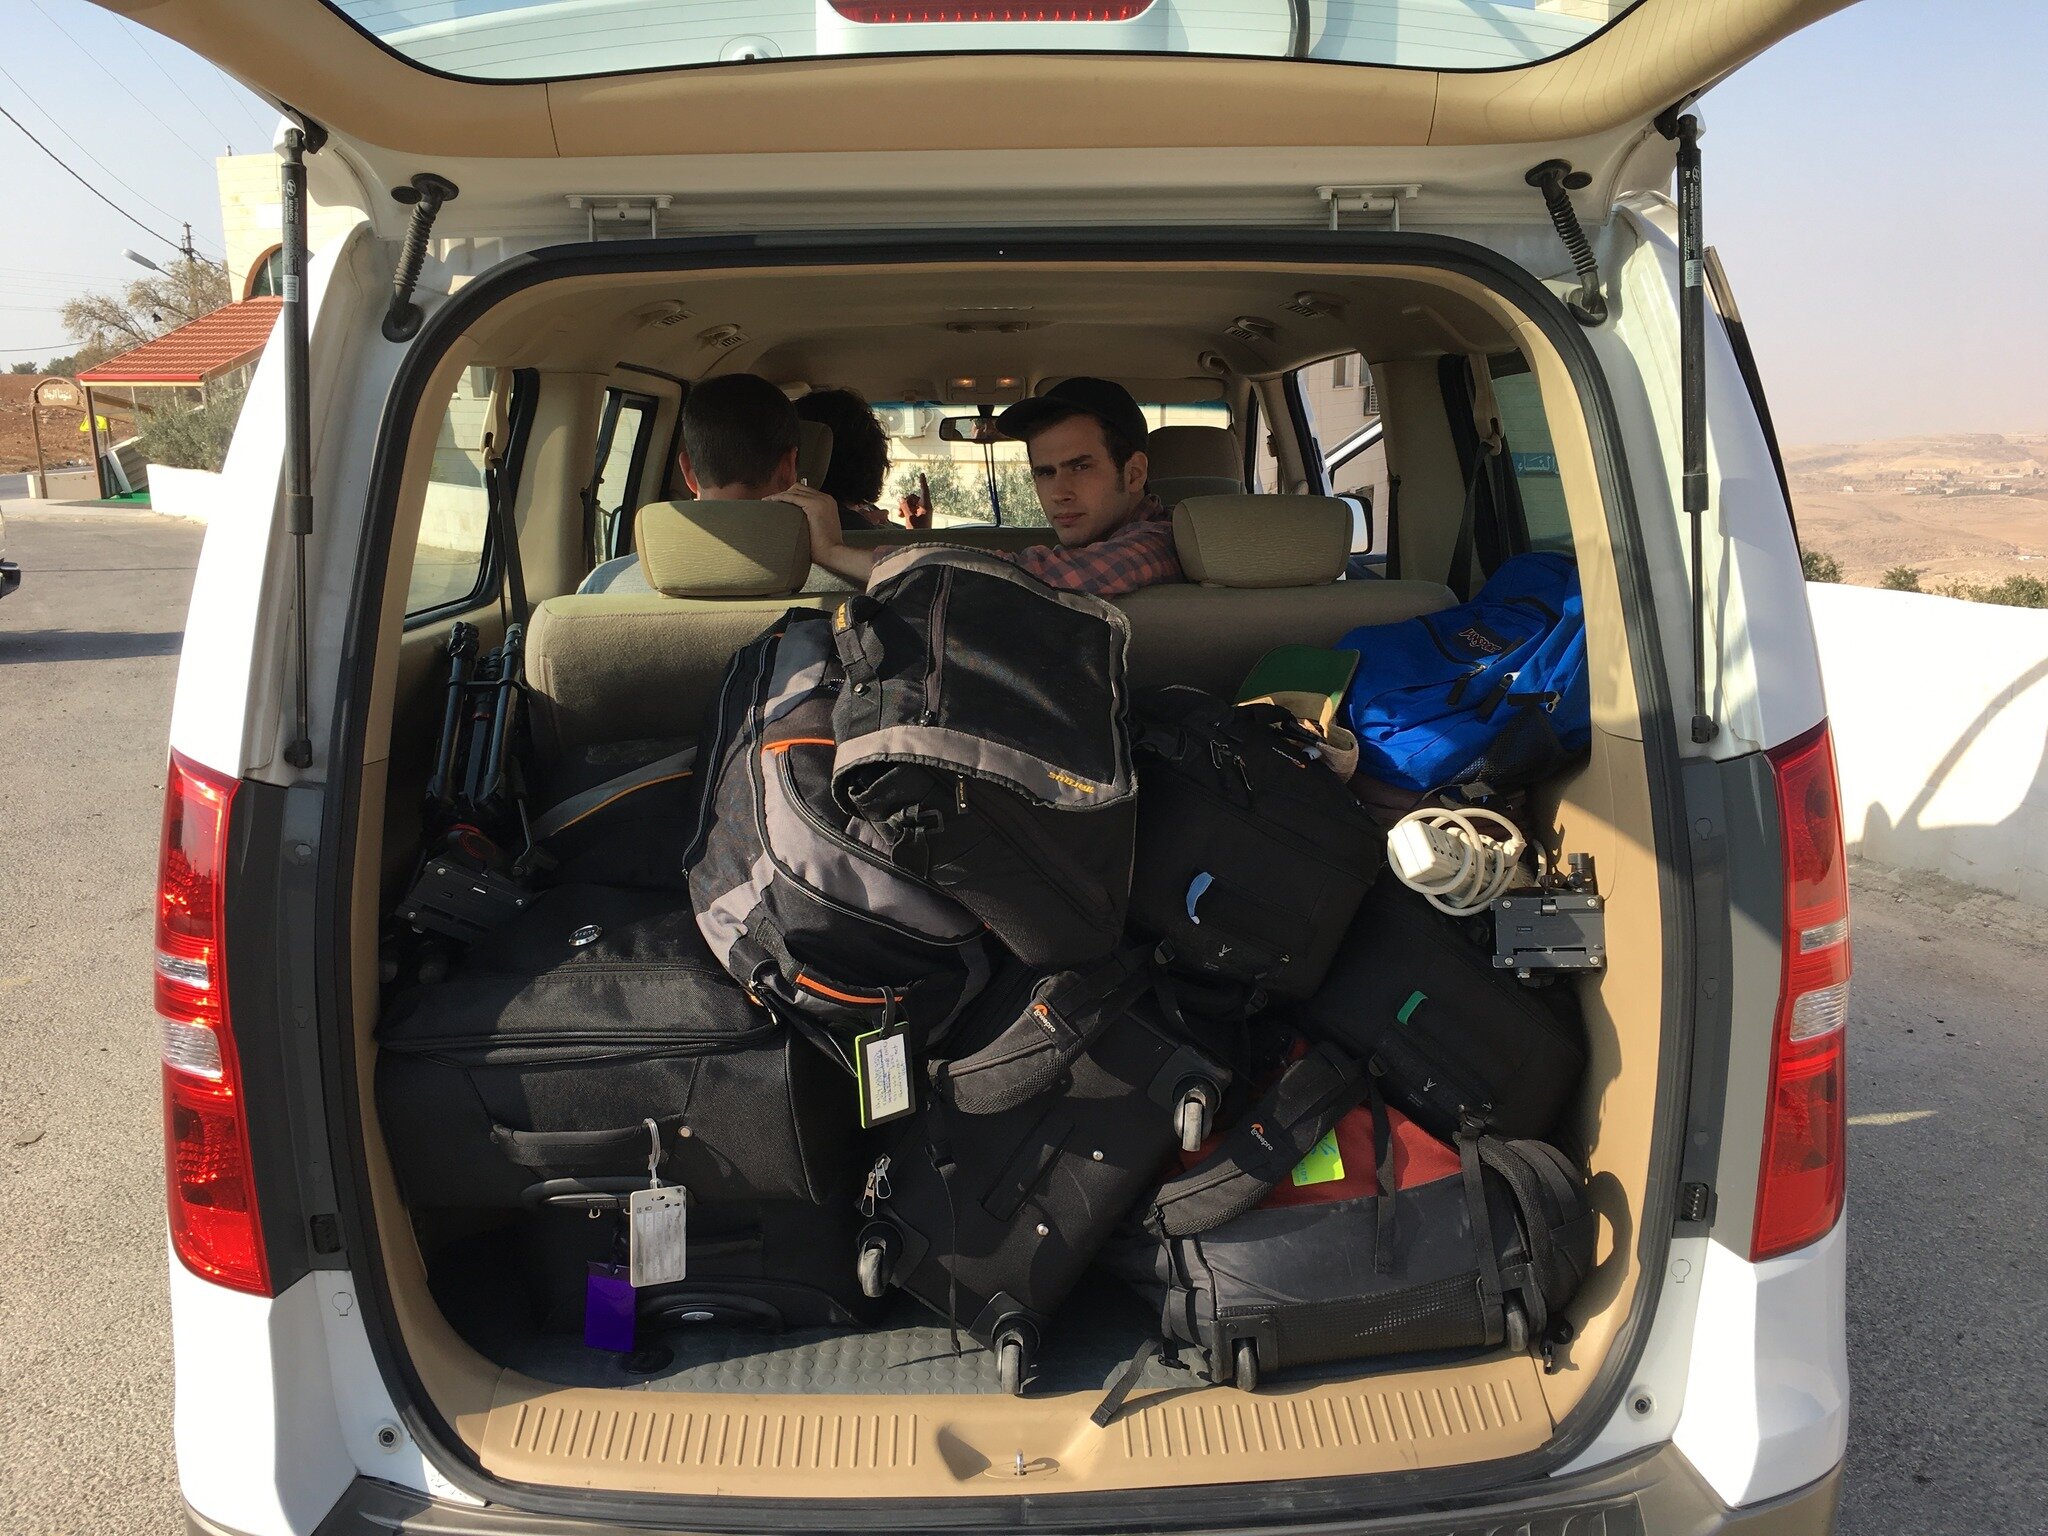 We&rsquo;ve been to the Middle East many times to film different projects. This is what our gear van typically looks like. 

#Film #behindthescenes #filmcrew #storytellingpictures